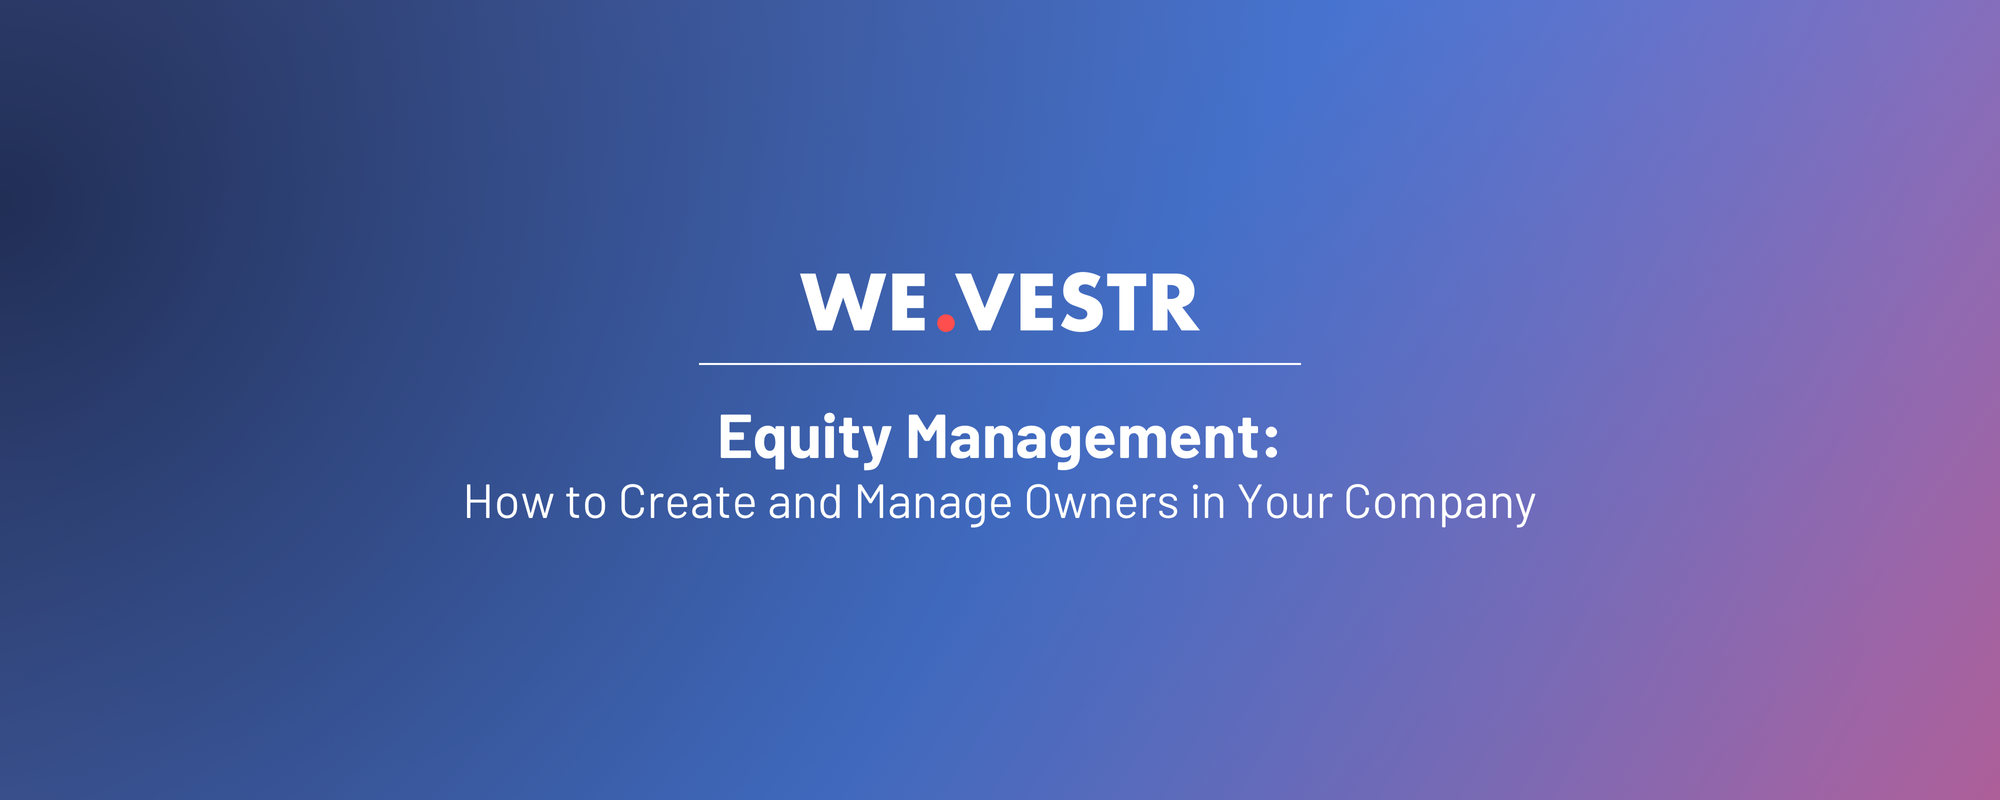 Equity Management: How to Create and Manage Owners in Your Company